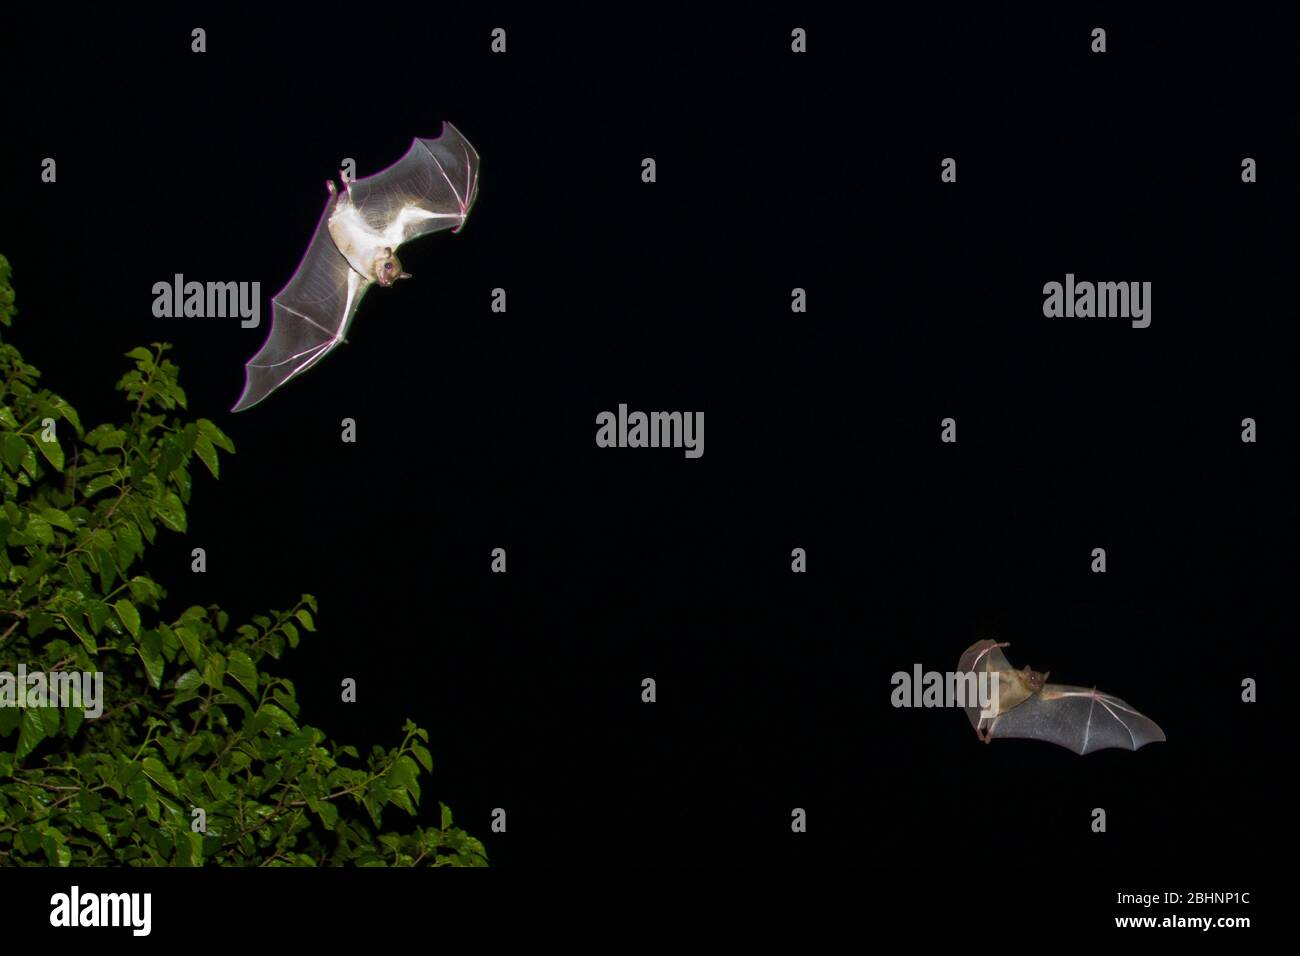 Egyptian Fruit Bats (Rousettus aegyptiacus) in flight at night. Photographed in the Mediterranean  region, Israel. The Egyptian rousette, or Egyptian Stock Photo